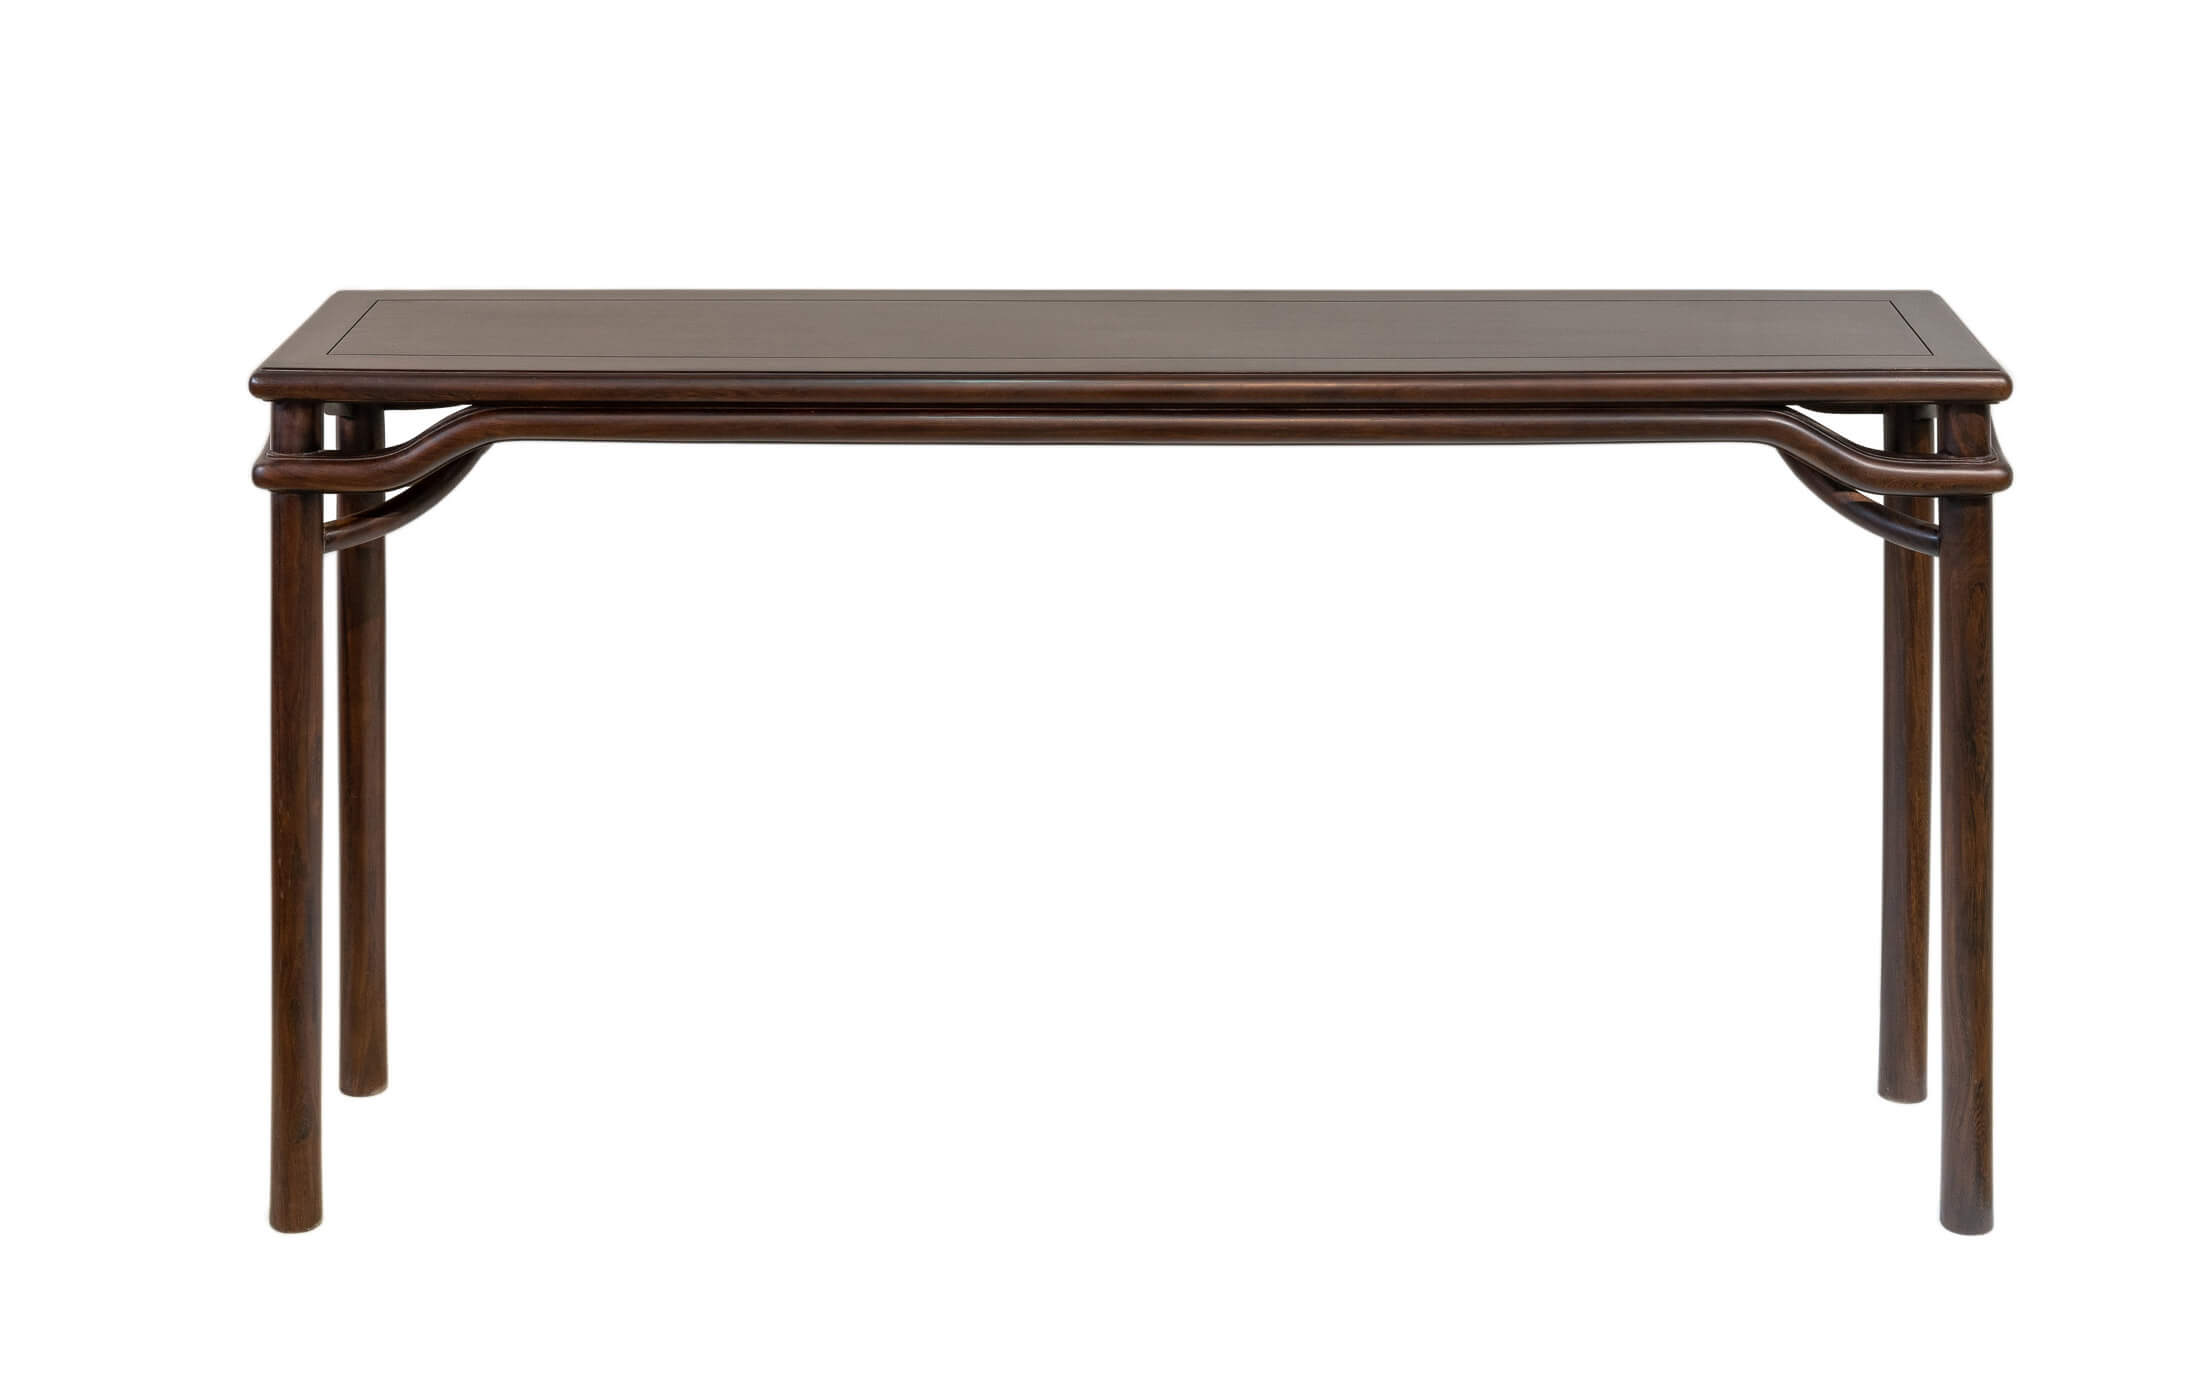 Chinese furniture Ming-style console